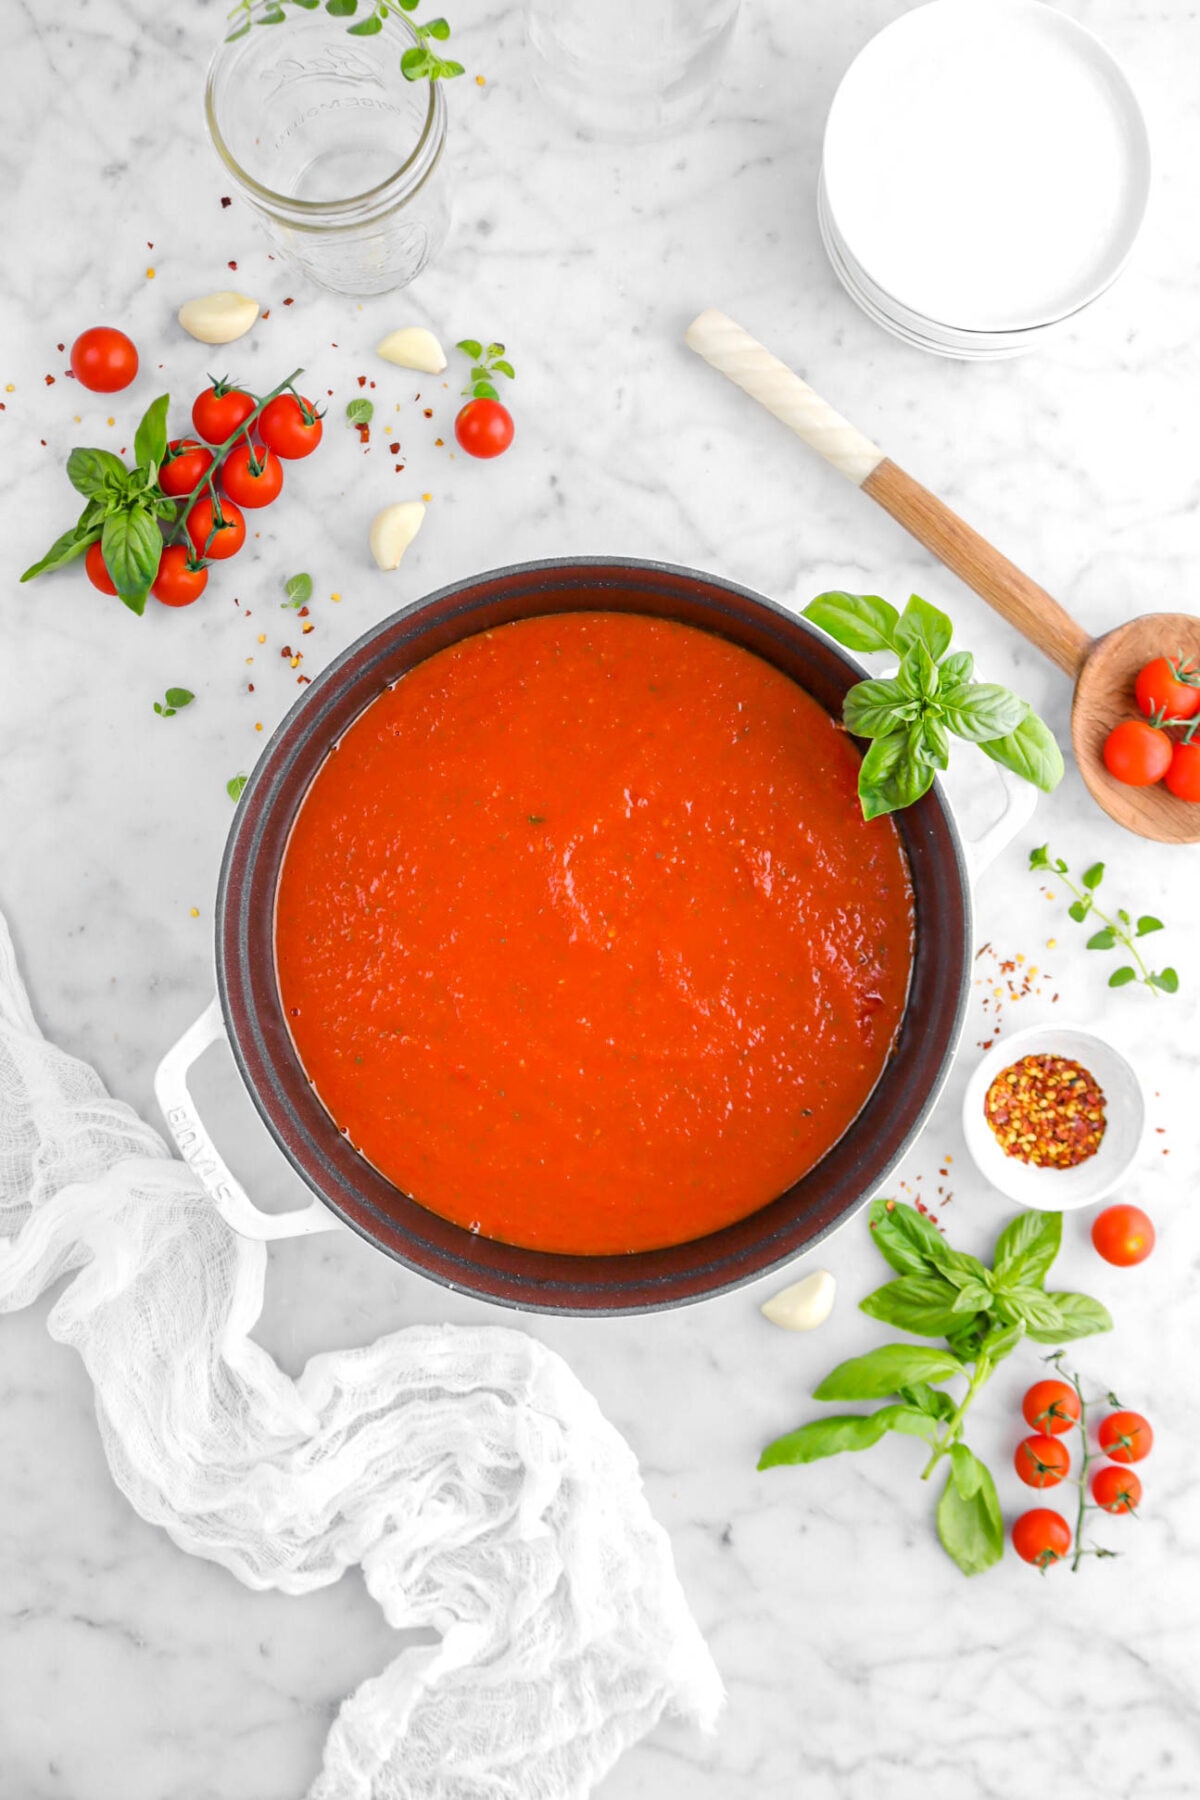 pulled back overhead shot of tomato sauce in large pot with basil and oregano sprigs around, bowl of red pepper flakes, tomatoes on the vine, with white cheese cloth and stack of white plates